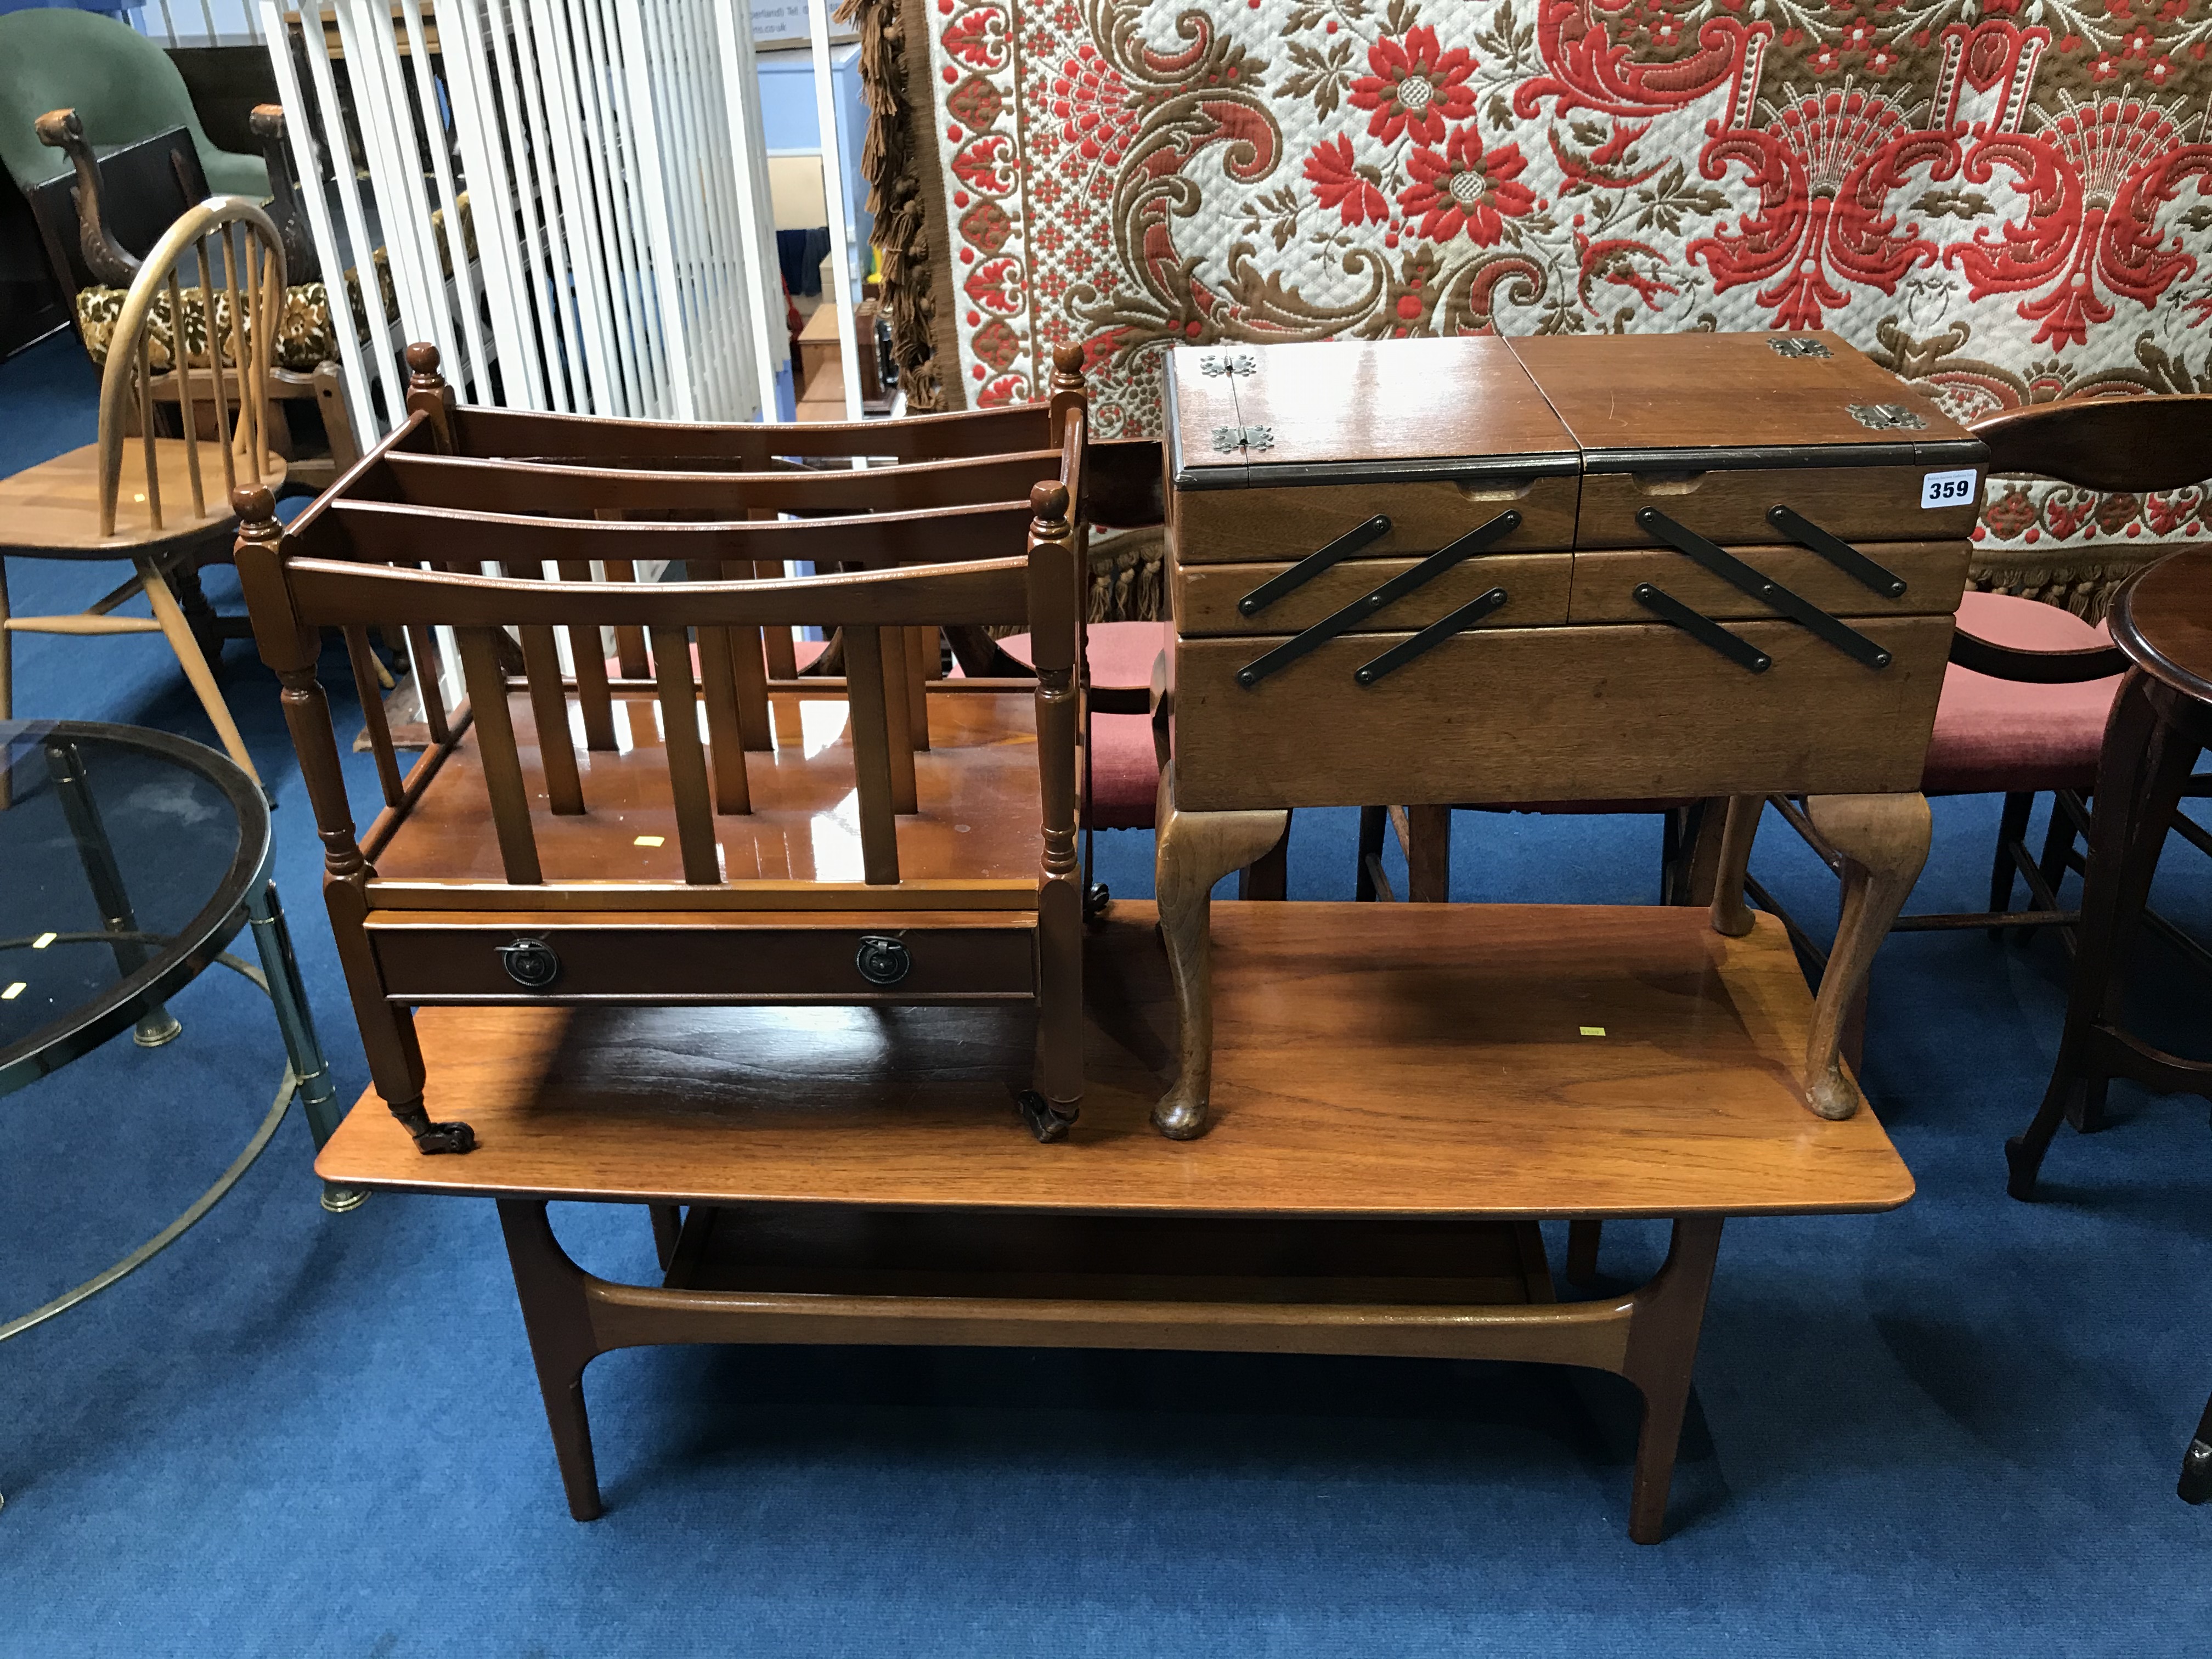 Canterbury, sewing box and coffee table